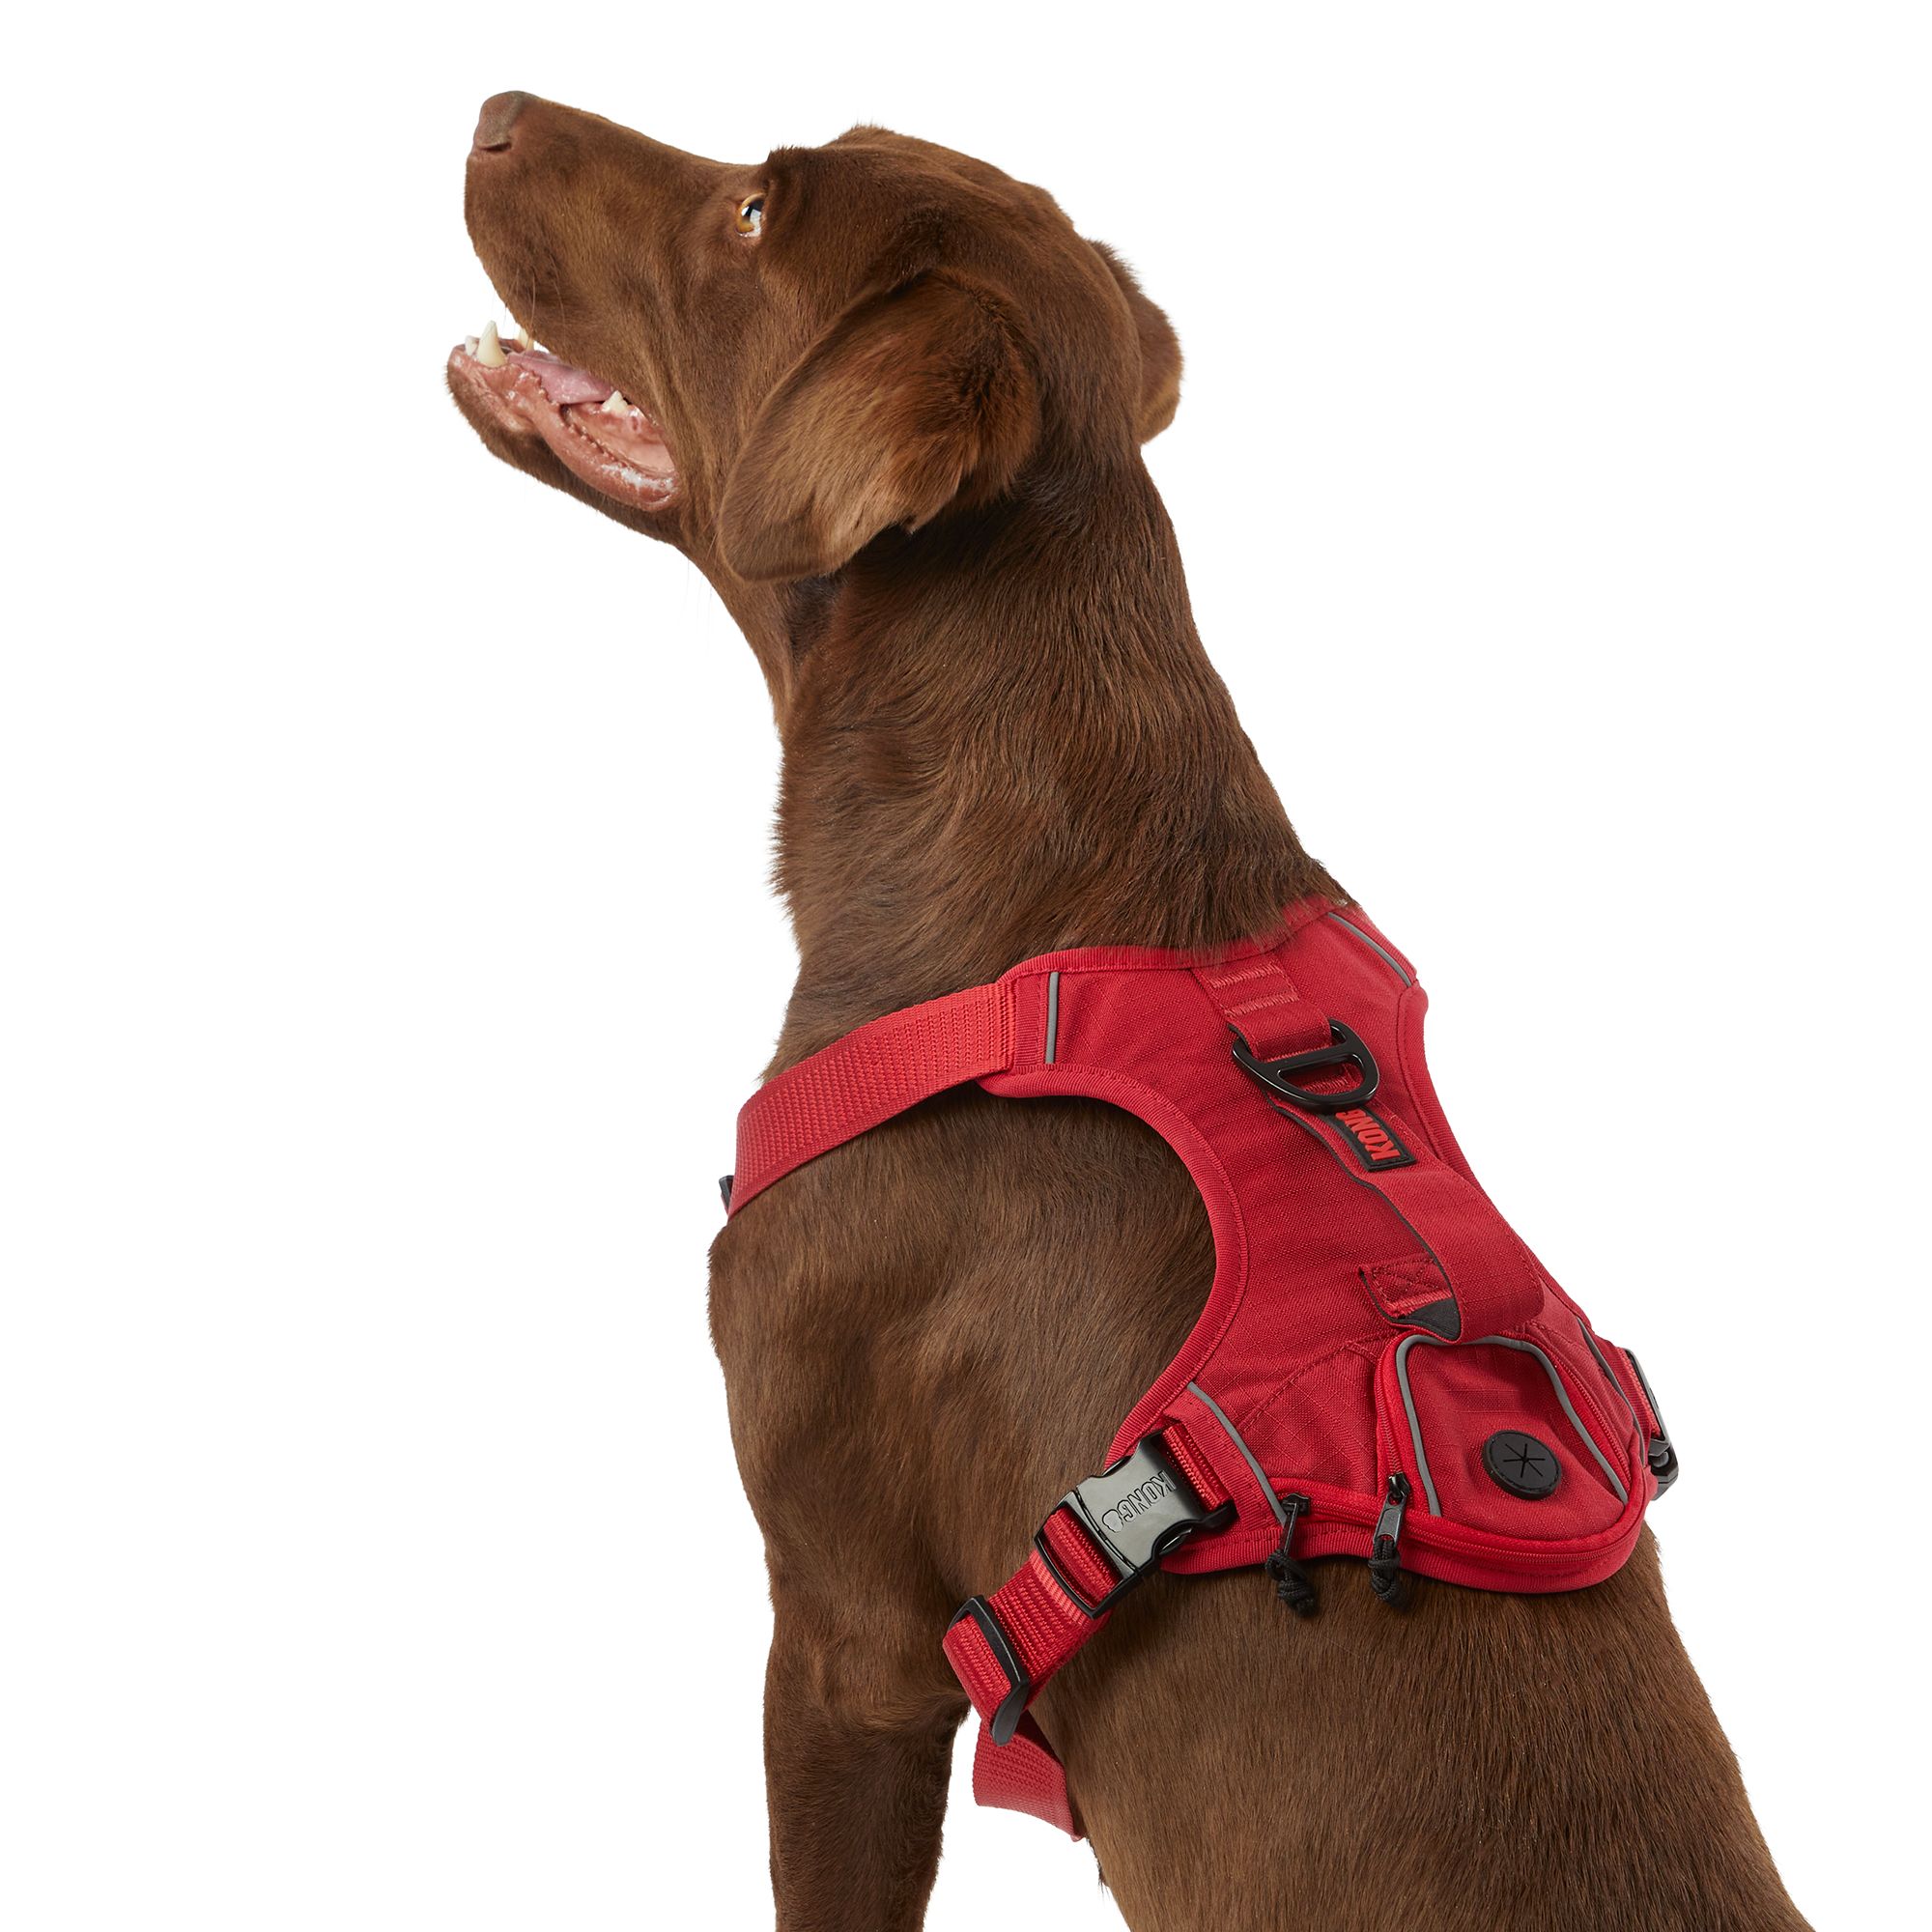  Pets First MLB St Louis Cardinals Puffer Vest for Dogs & Cats,  Size Small. Warm, Cozy, and Waterproof Dog Coat, for Small and Large  Dogs/Cats. Best MLB Licensed PET Warming